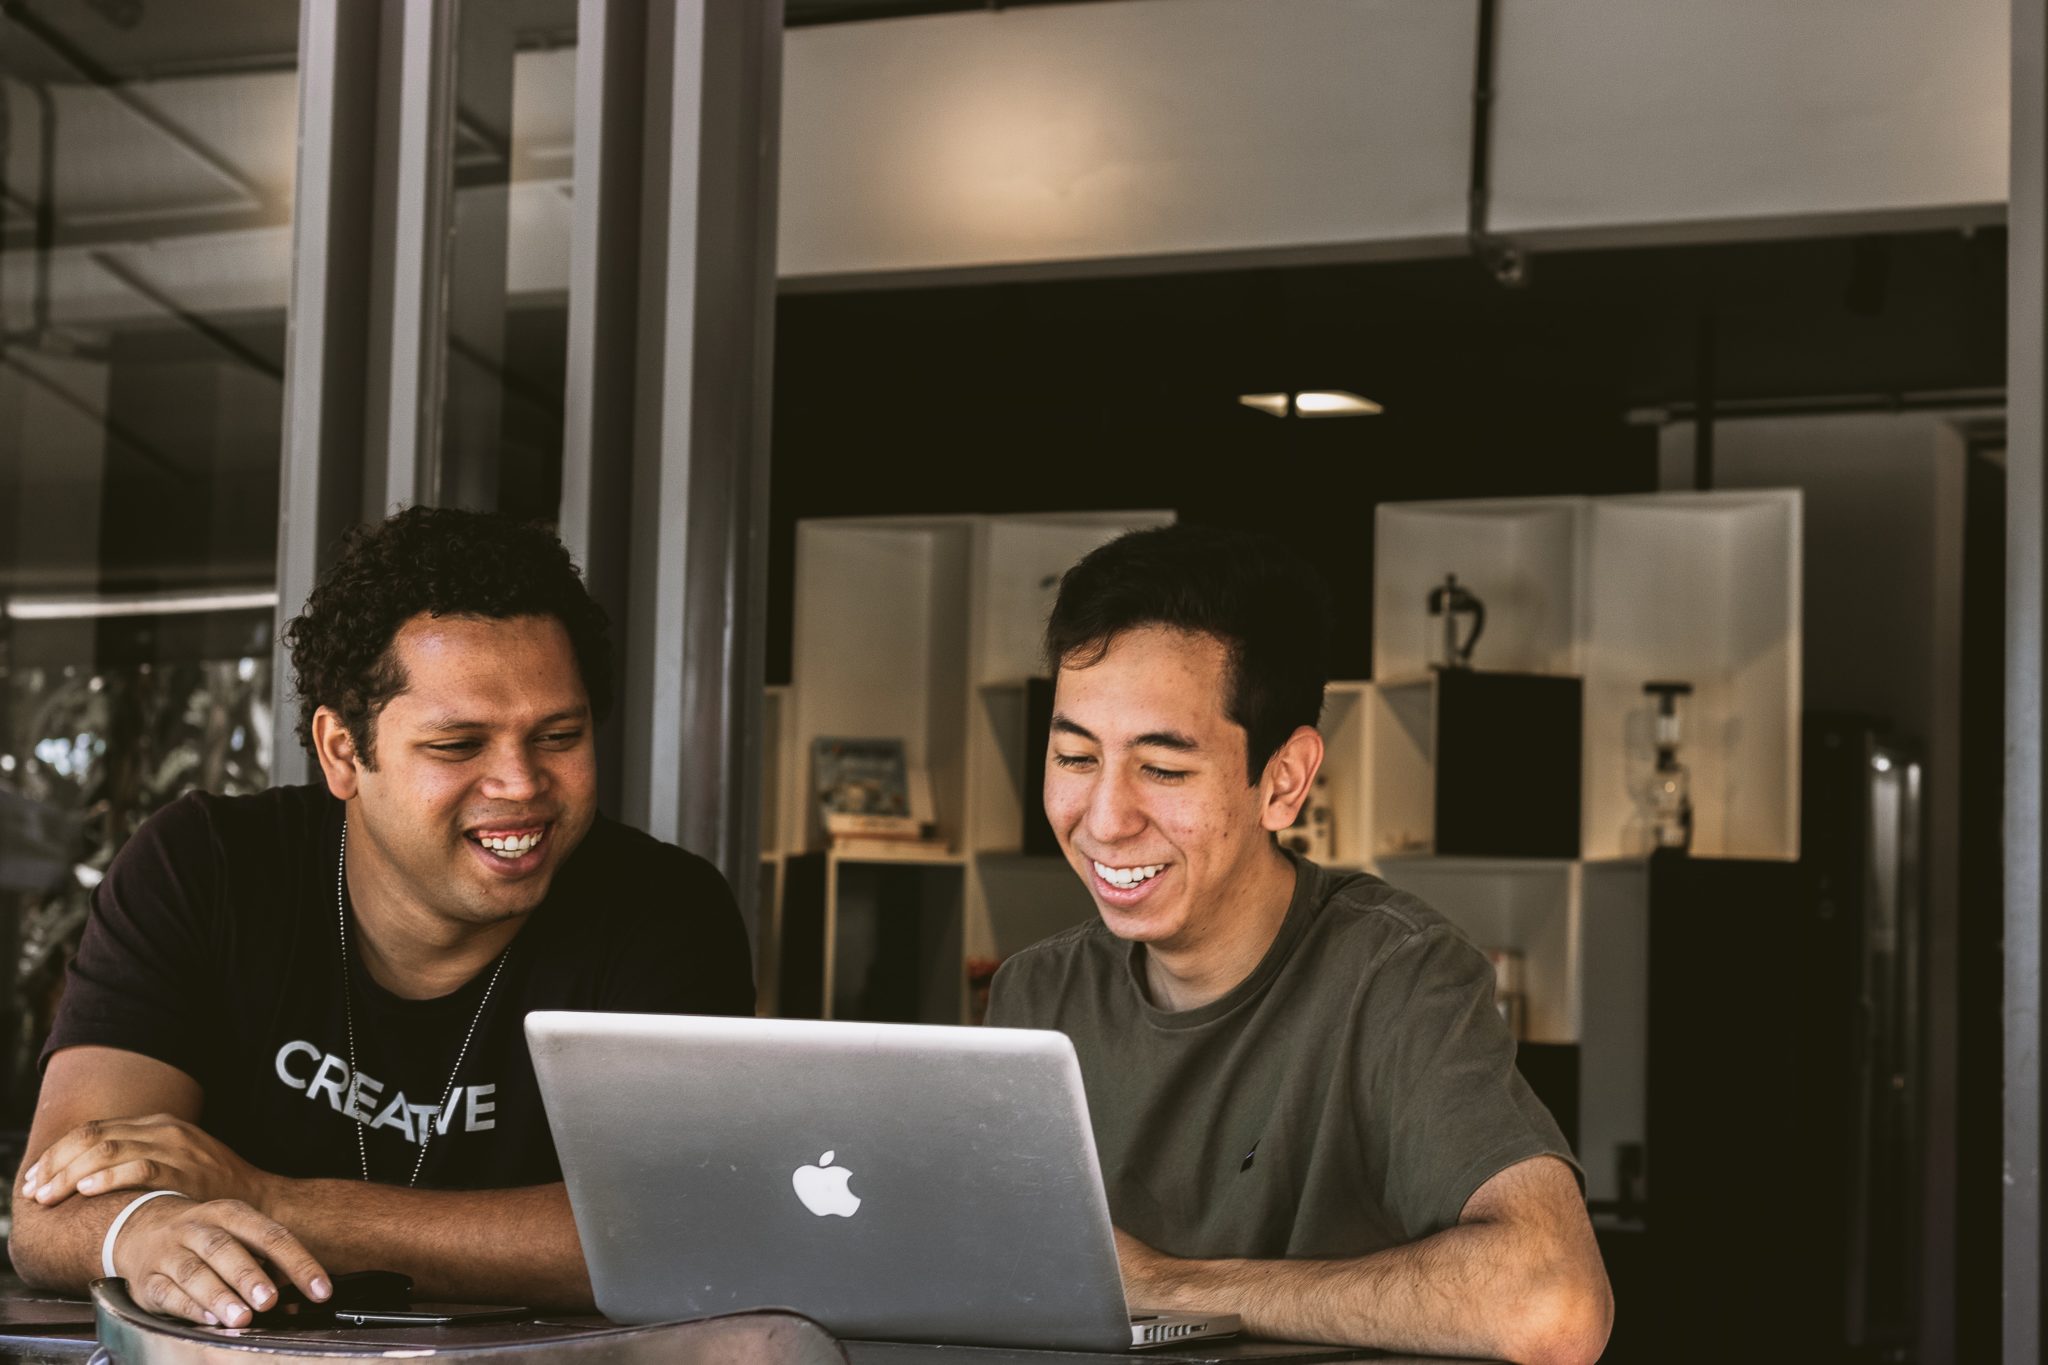 two men in their 20s or 30s smiling and working on a laptop in a modern office or co-working space